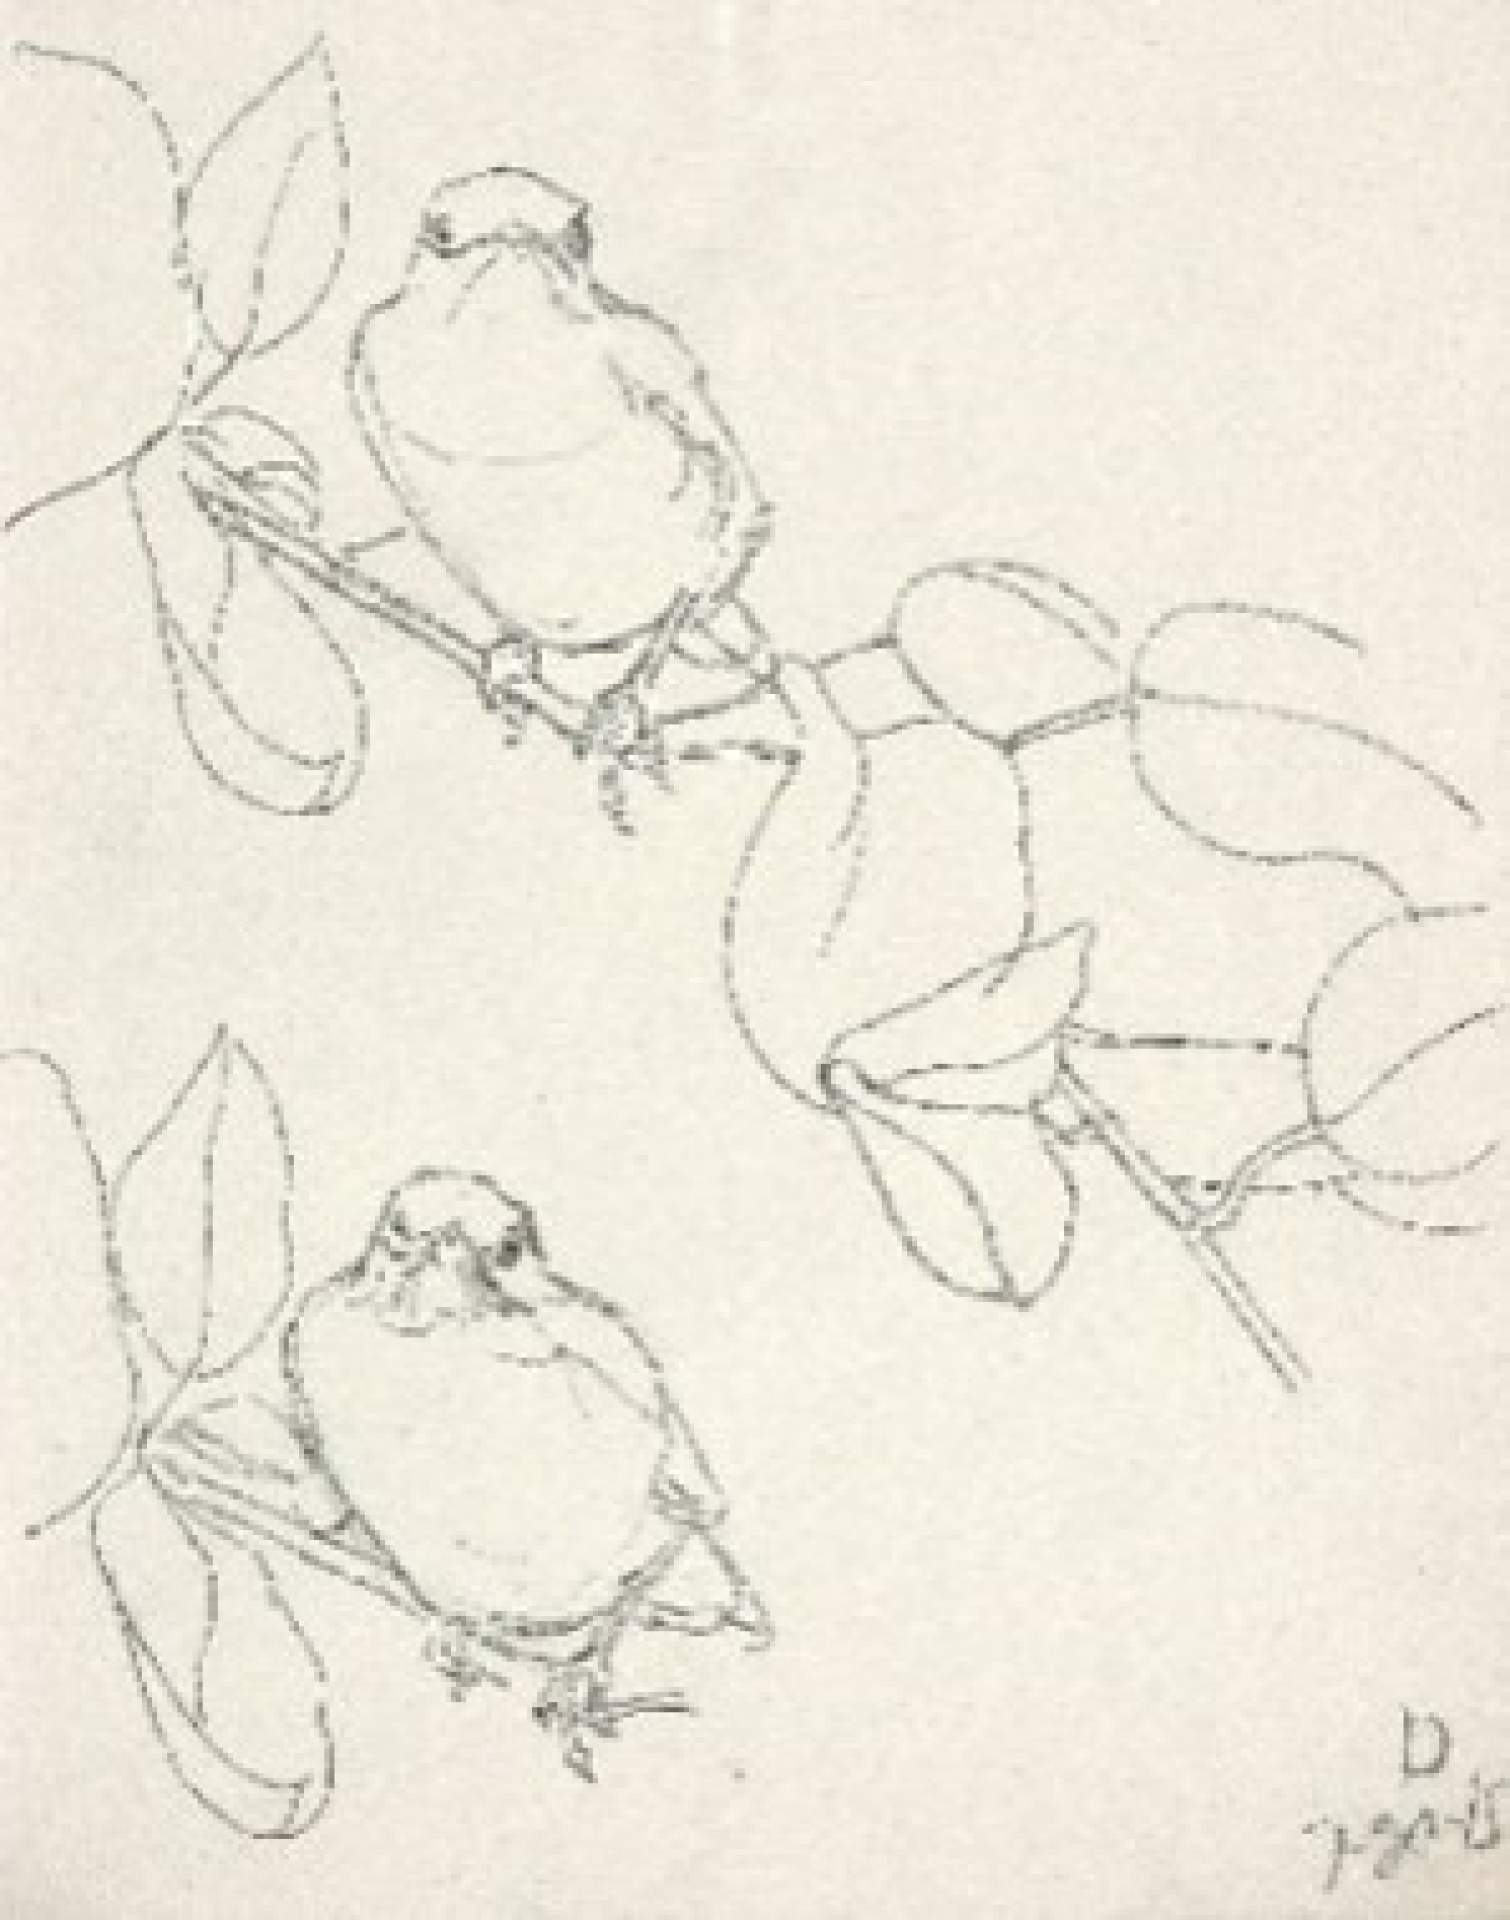 D – Sketches of young Robin